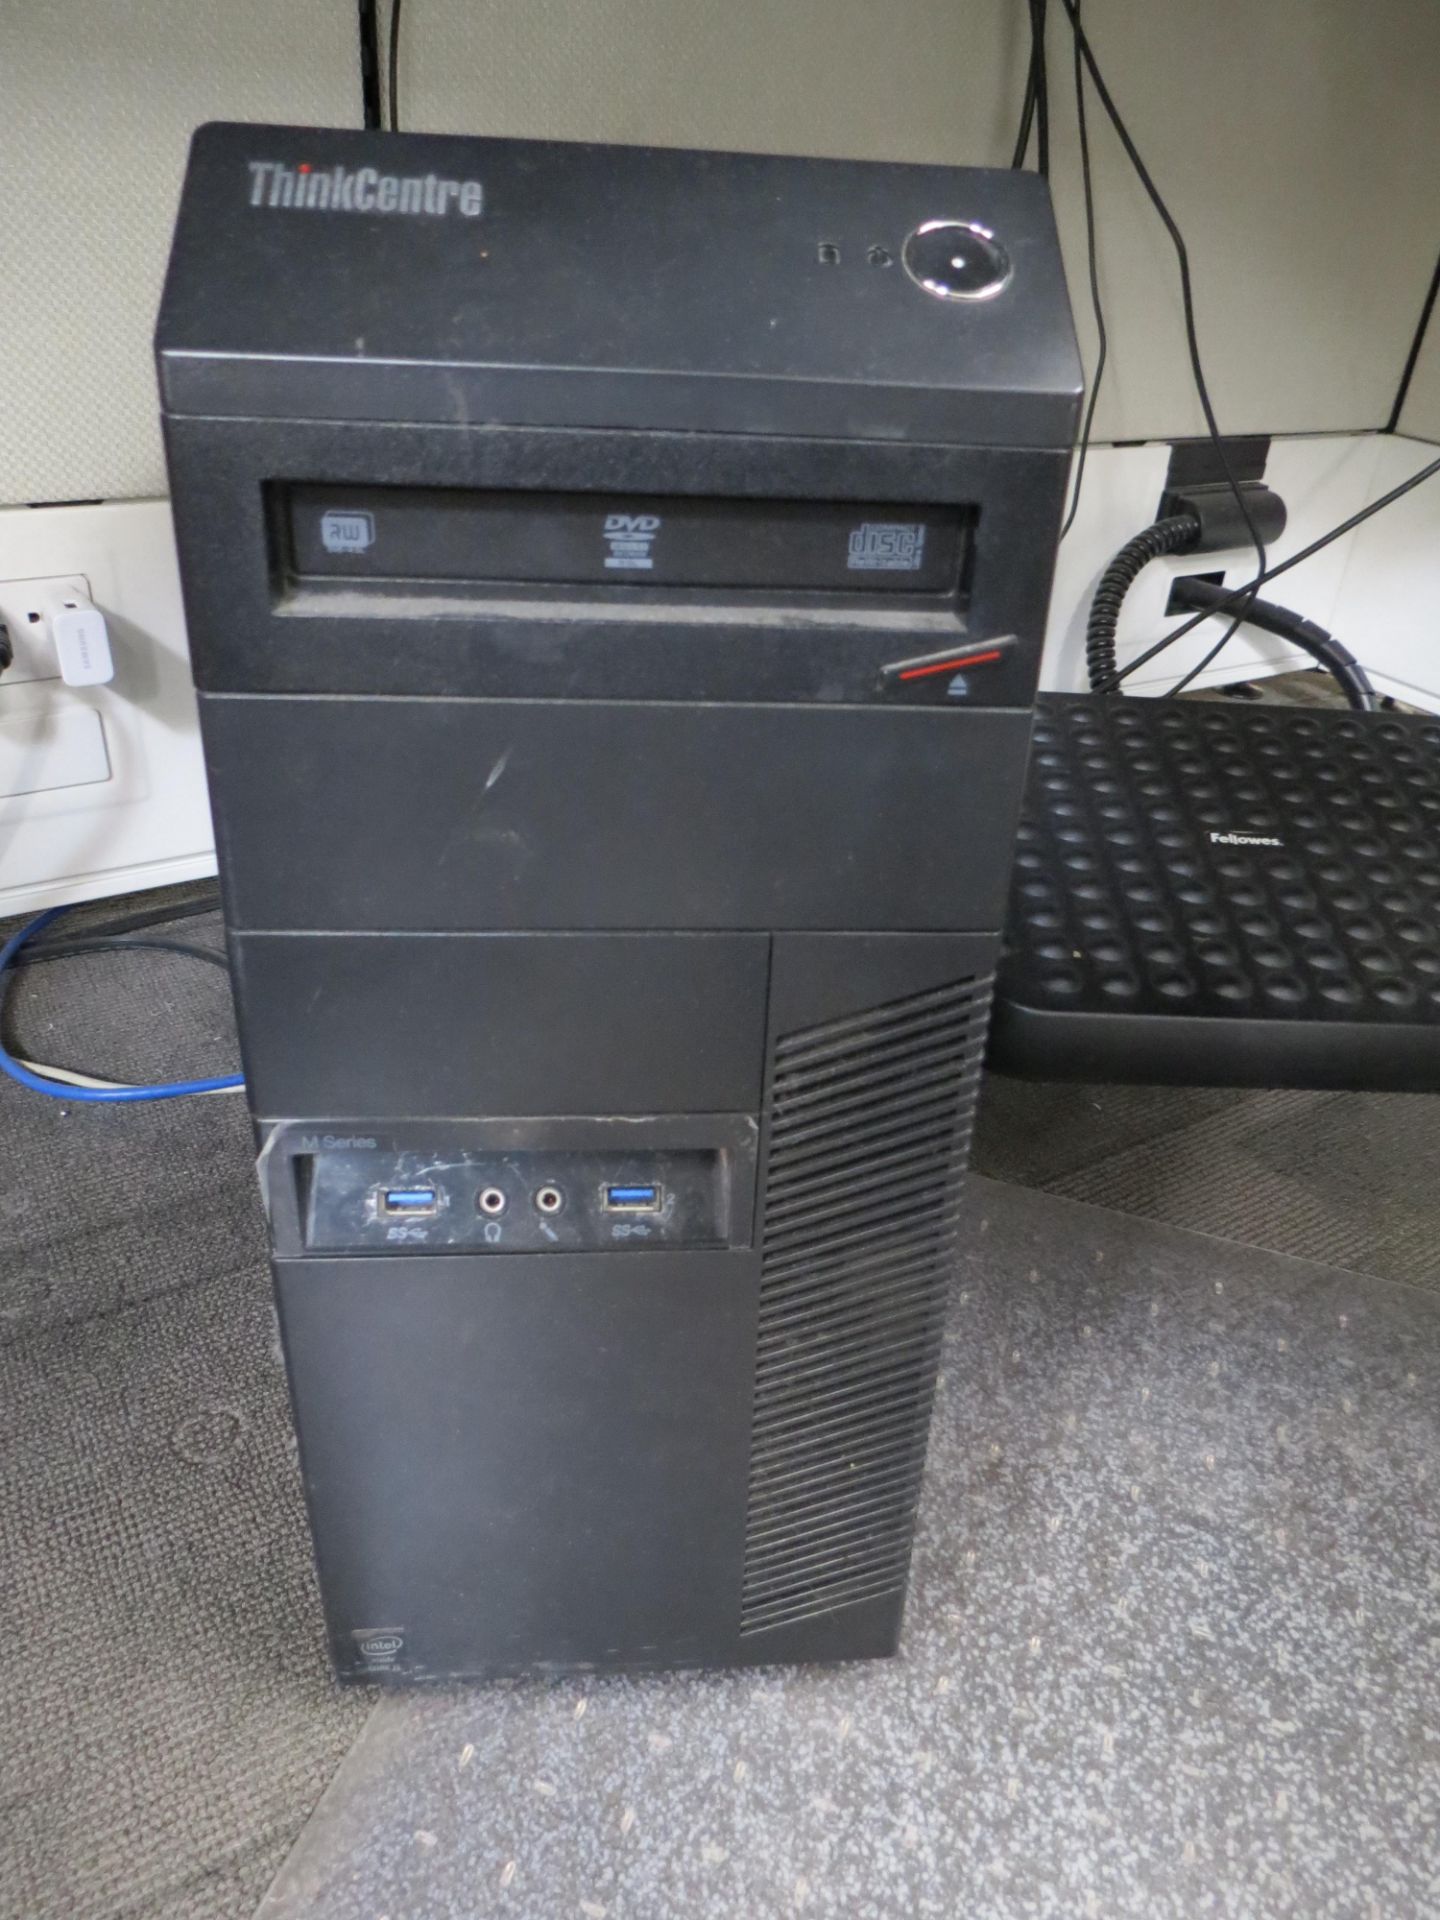 2 LENOVO THINKCENTRE TOWER DESKTOPS, P-TOUCH QL-500 & BROTHER LABEL PRINTERS, 4 MONITORS, - Image 6 of 8